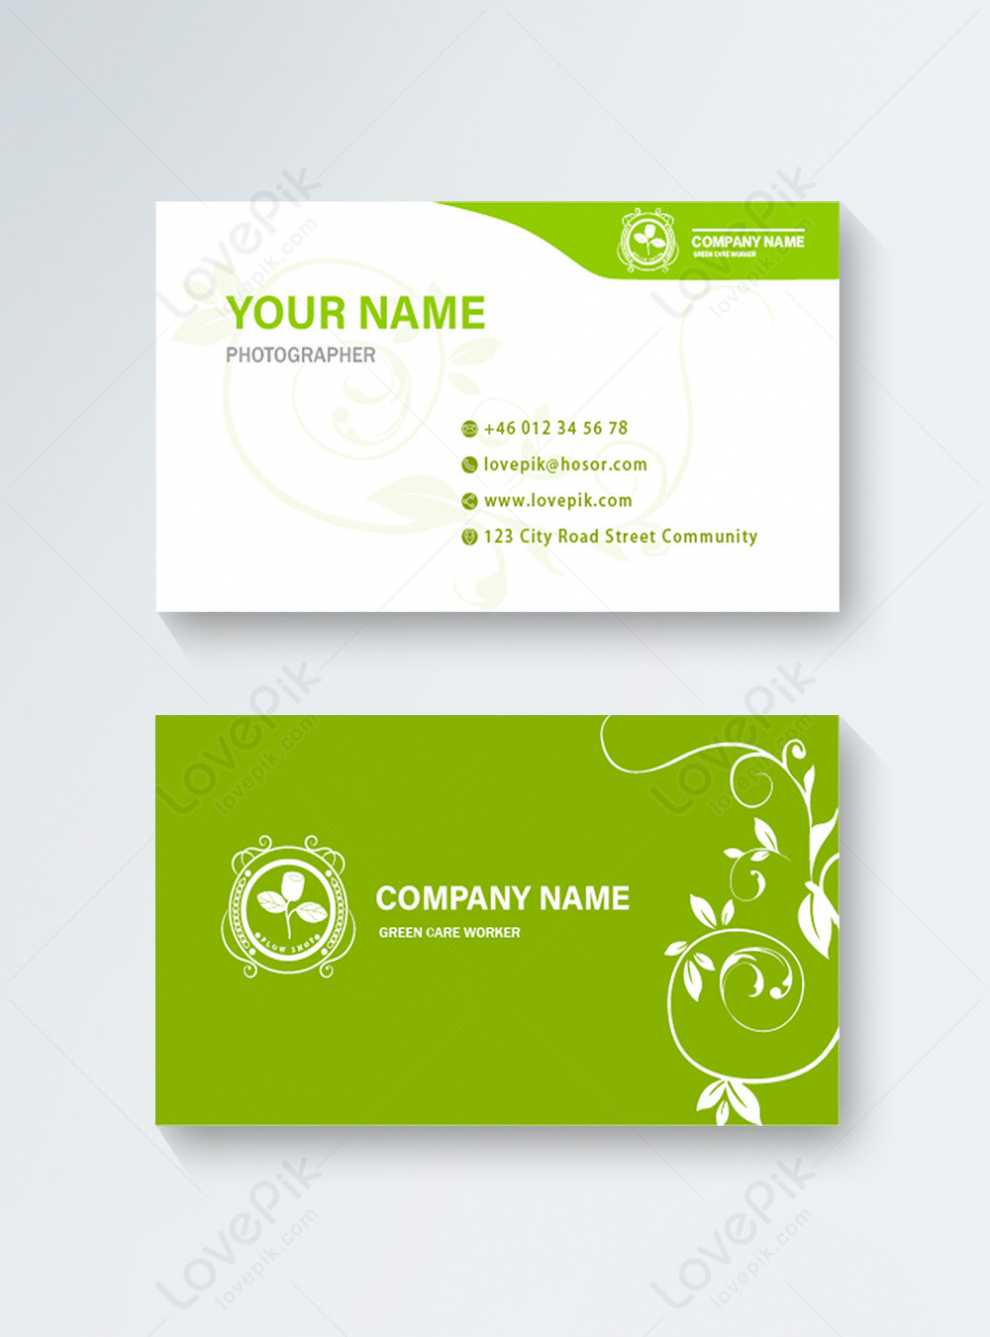 Green Lawn Care Business Card Template Image_Picture Free within Lawn Care Business Cards Templates Free